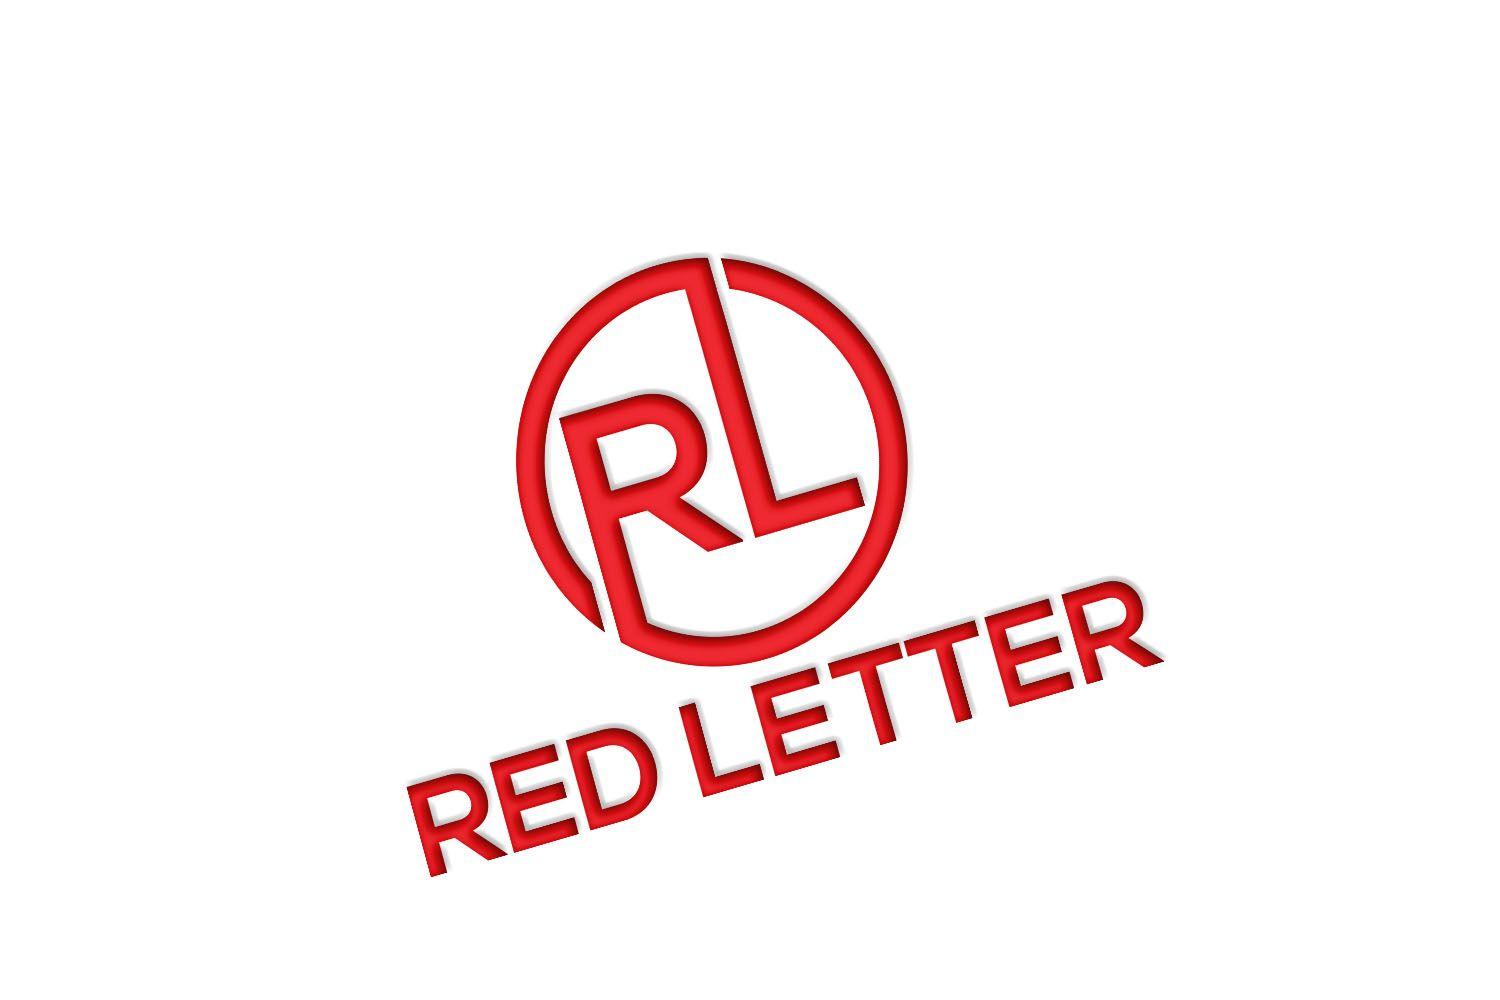 Red Letter Company Logo - Modern, Bold, It Company Logo Design for Red Letter